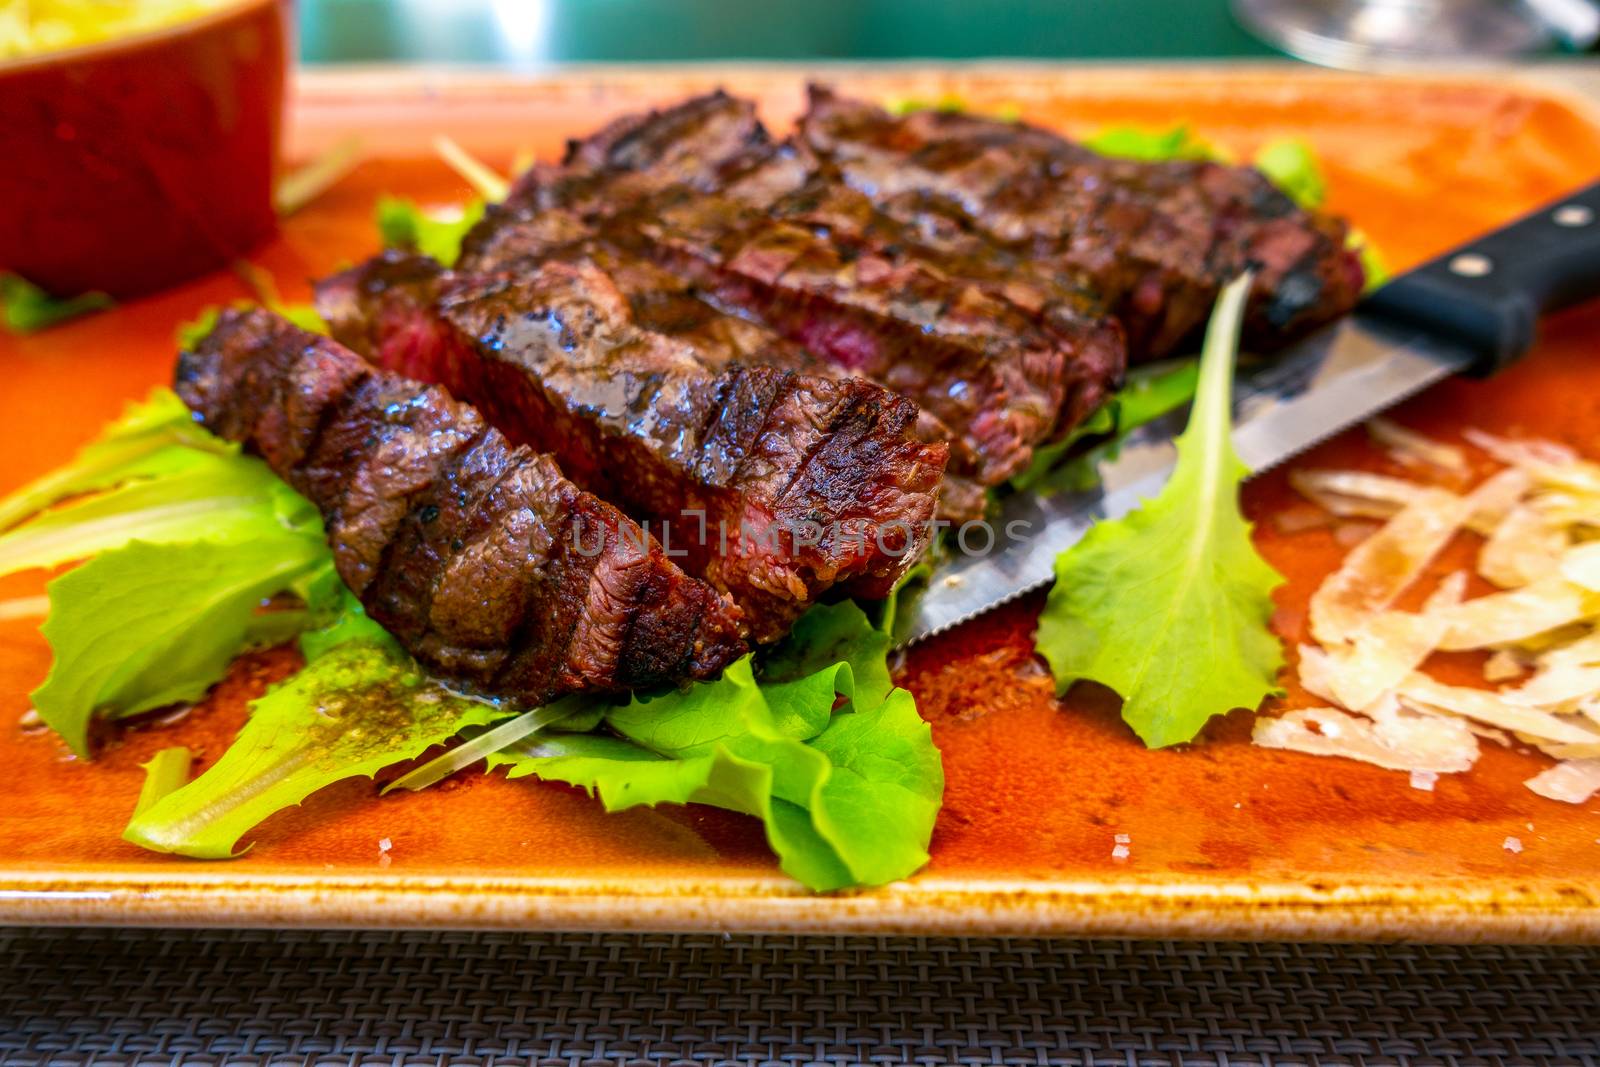 Traditional Italian Tagliata Steak with Parmesan and Salad as close-up on a plate by asafaric